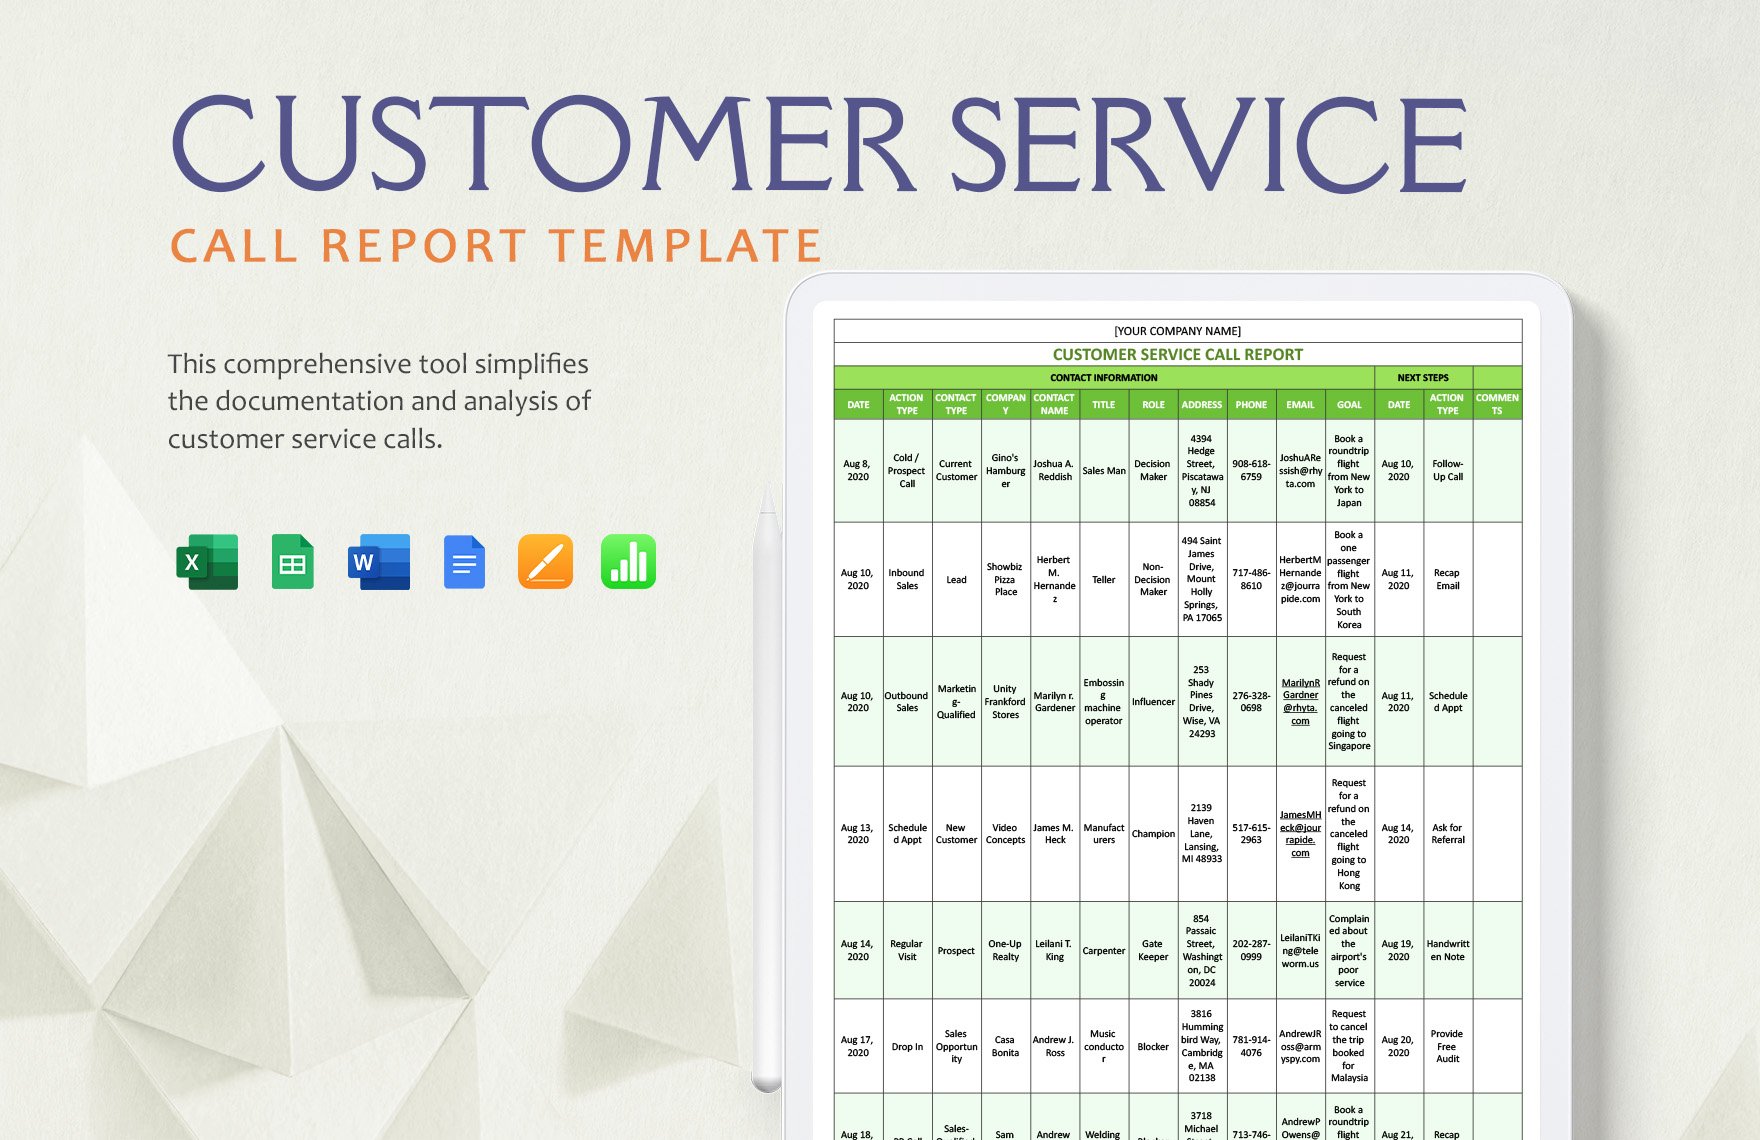 Free Customer Service Call Report Template in Word, Google Docs, Excel, Google Sheets, Apple Pages, Apple Numbers